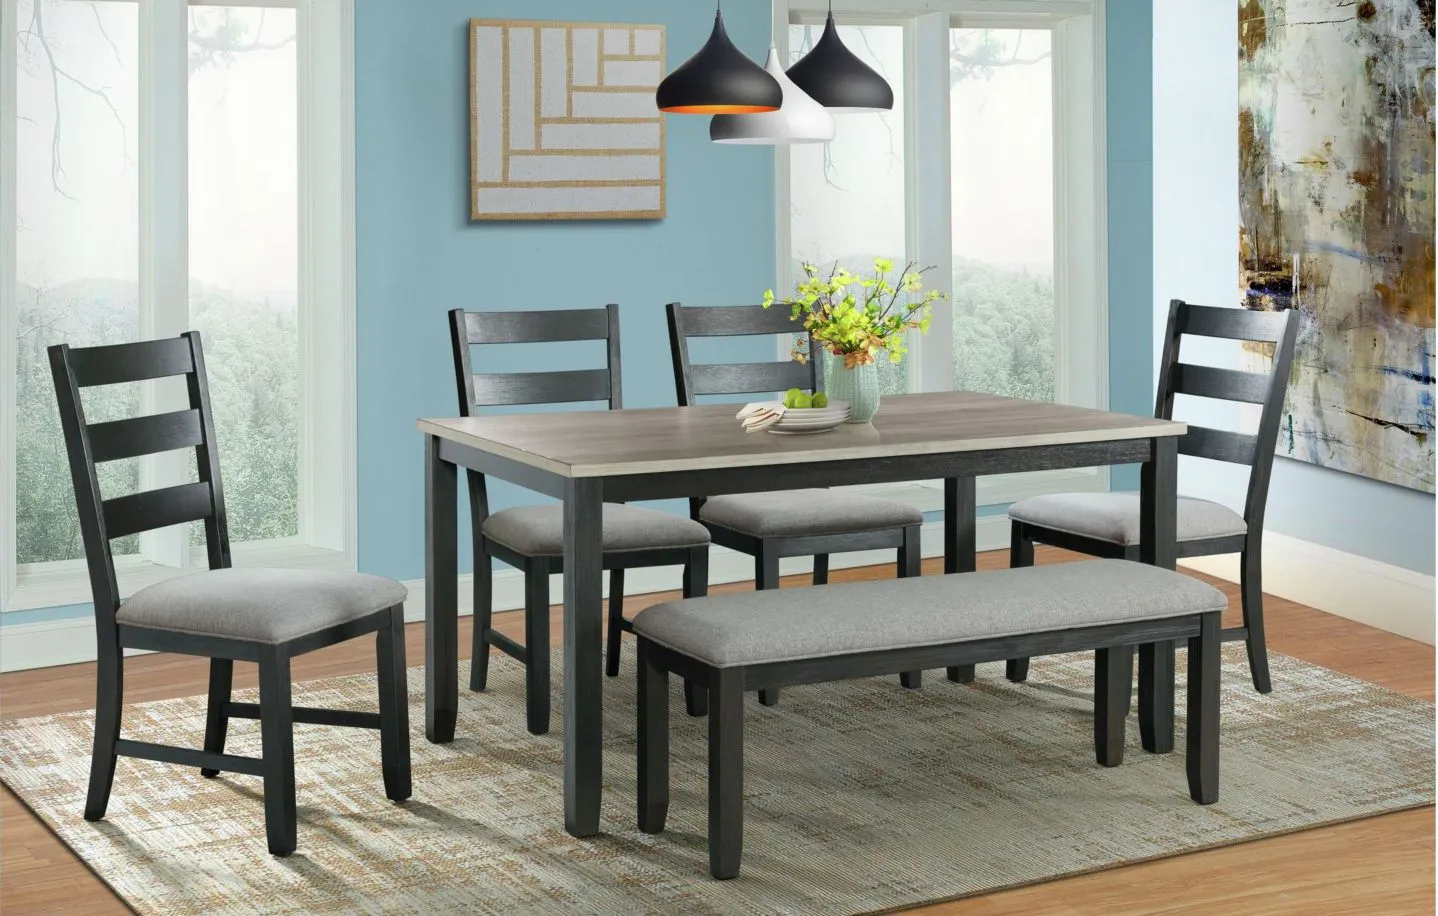 Glenwood 6-pc. Dining Set w/ Bench in Gray/Black by Elements International Group